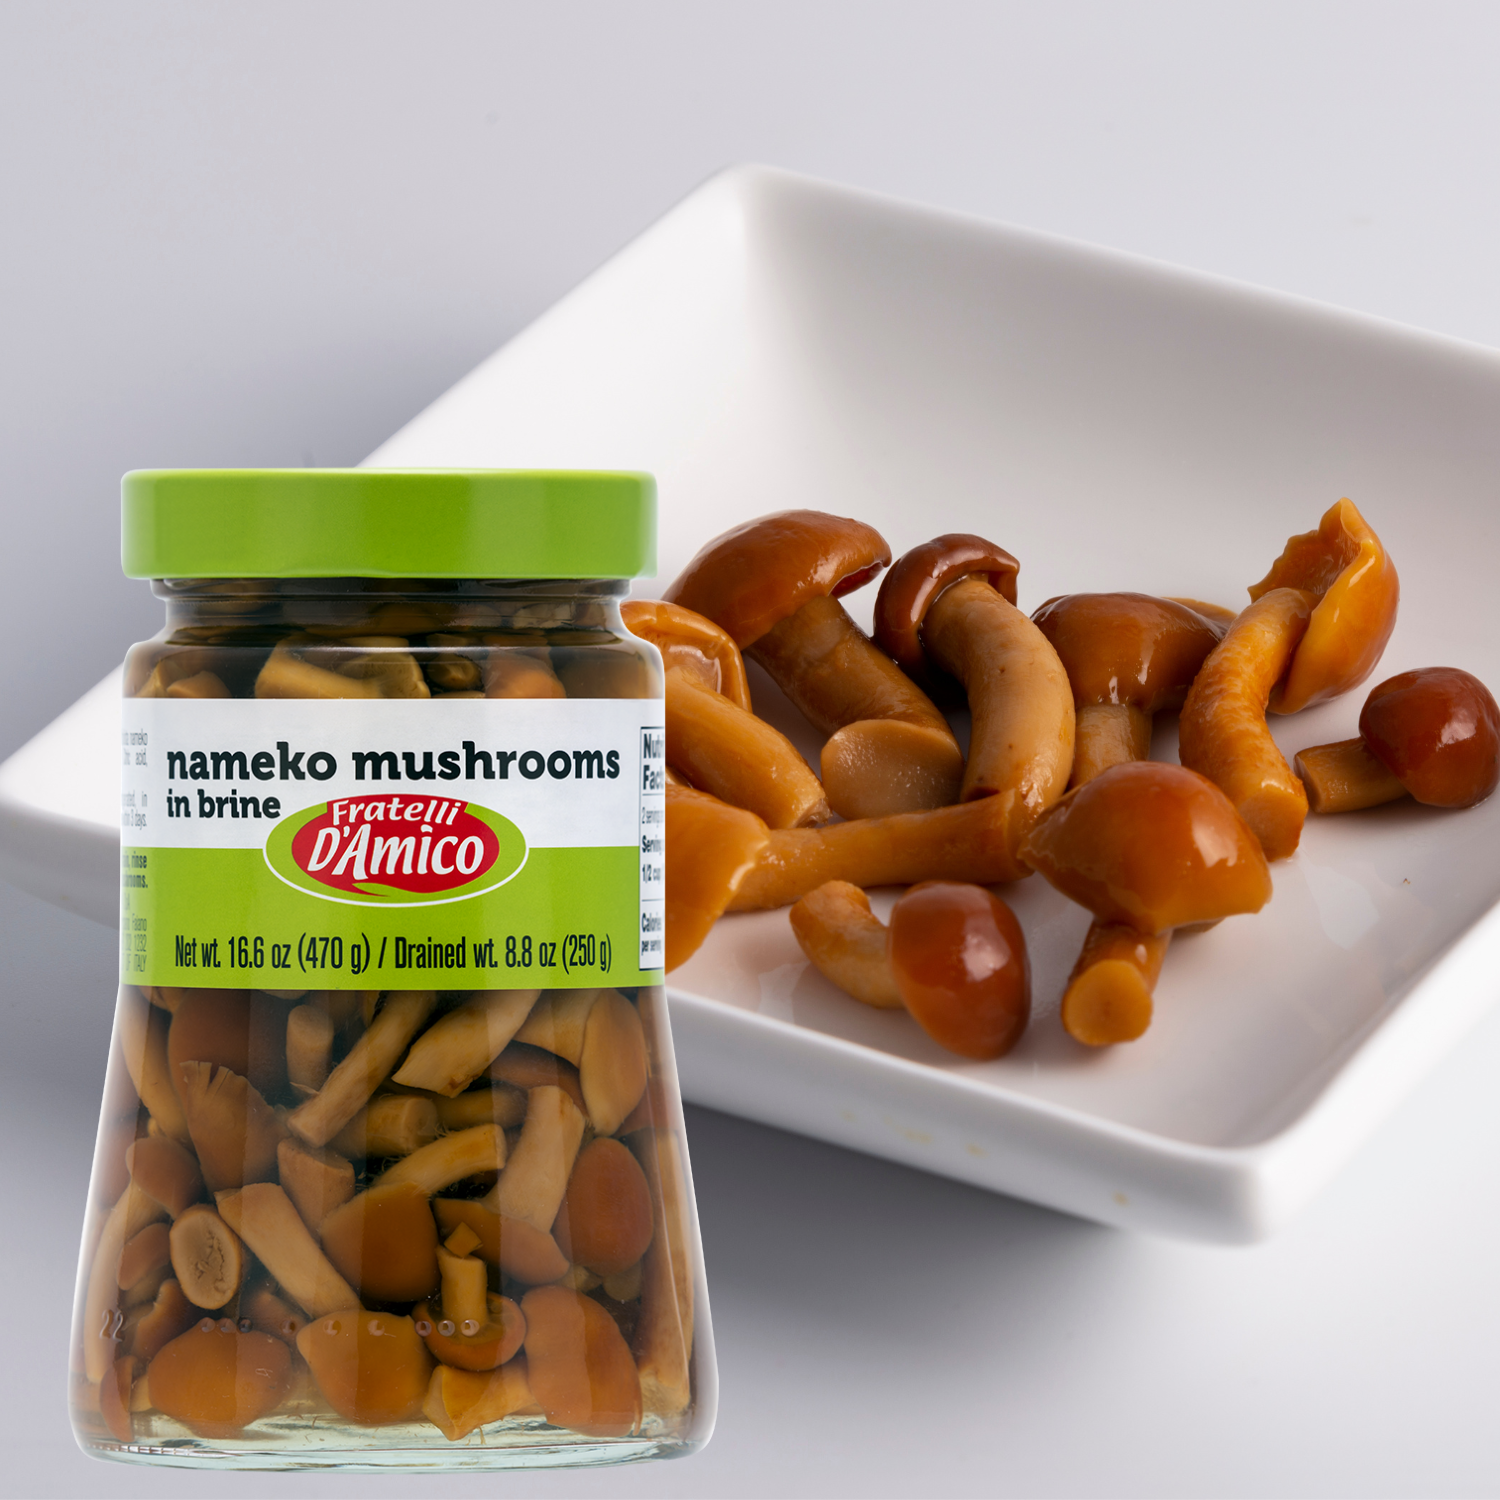 Nameko Mushooms, Forest Mushrooms, Japanese, Great for Sauteéing or in Soups, 16.6 oz (470 g), Fratelli D'Amico. Product of Italy.